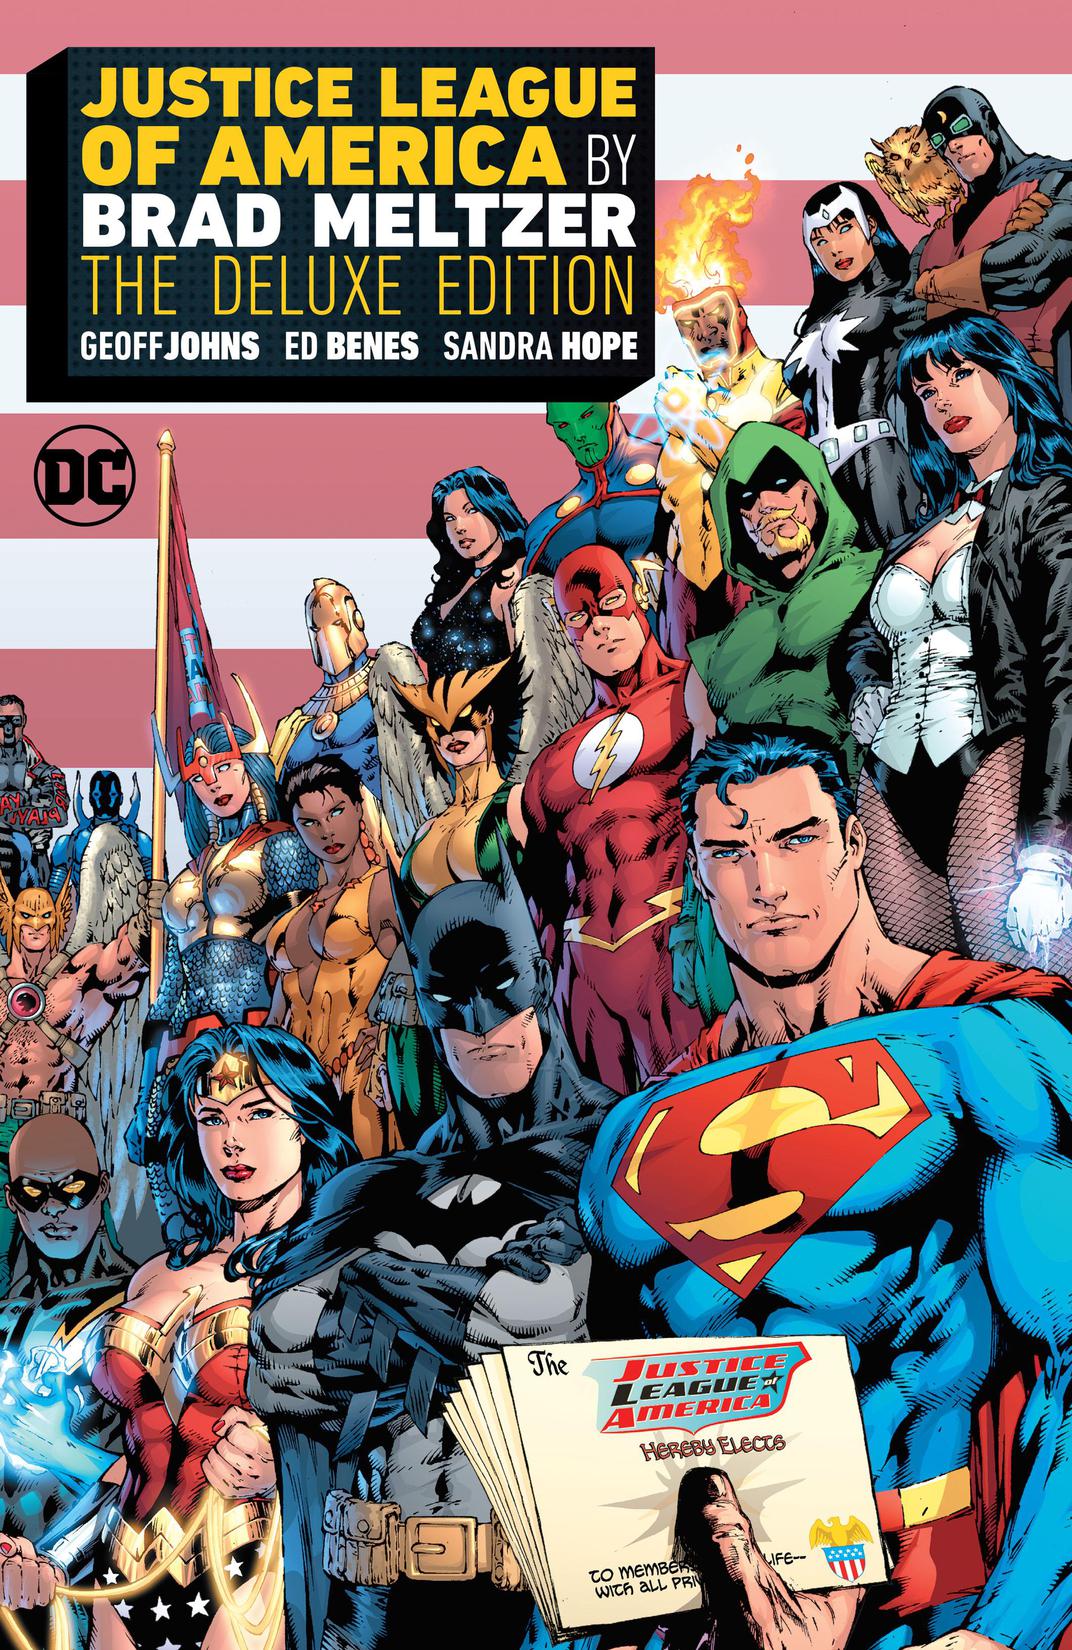 Justice League of America by Brad Meltzer: The Deluxe Edition preview images